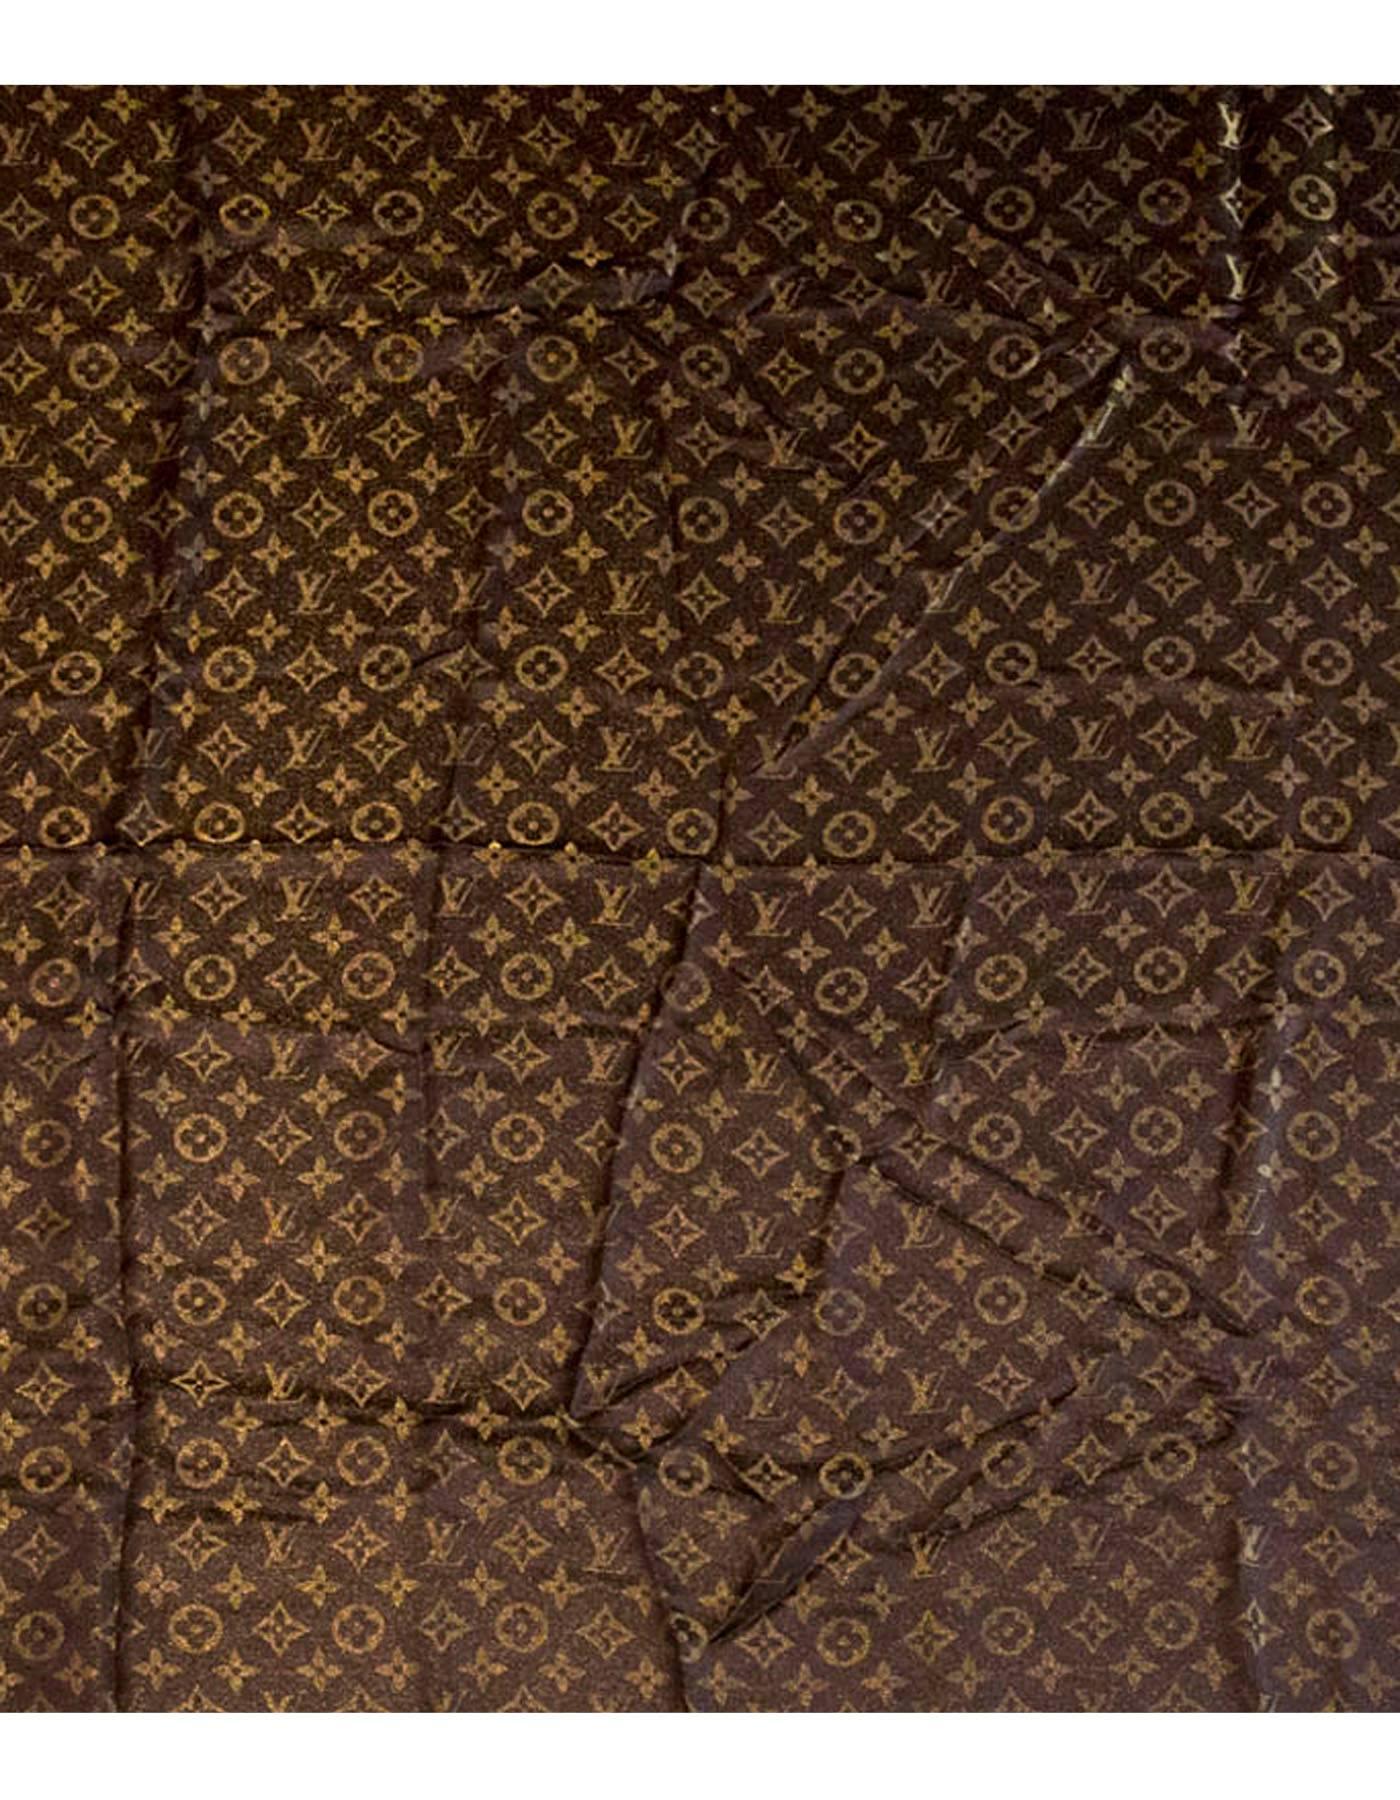 Louis Vuitton Brown Lurex Monogram Shine Shawl

Made In: Italy
Color: Brown and gold
Composition: 47% silk, 26% viscose, 17% wool, 10% polyester
Overall Condition: Excellent pre-owned condition
Retail: $675+ tax
Includes: Louis Vuitton